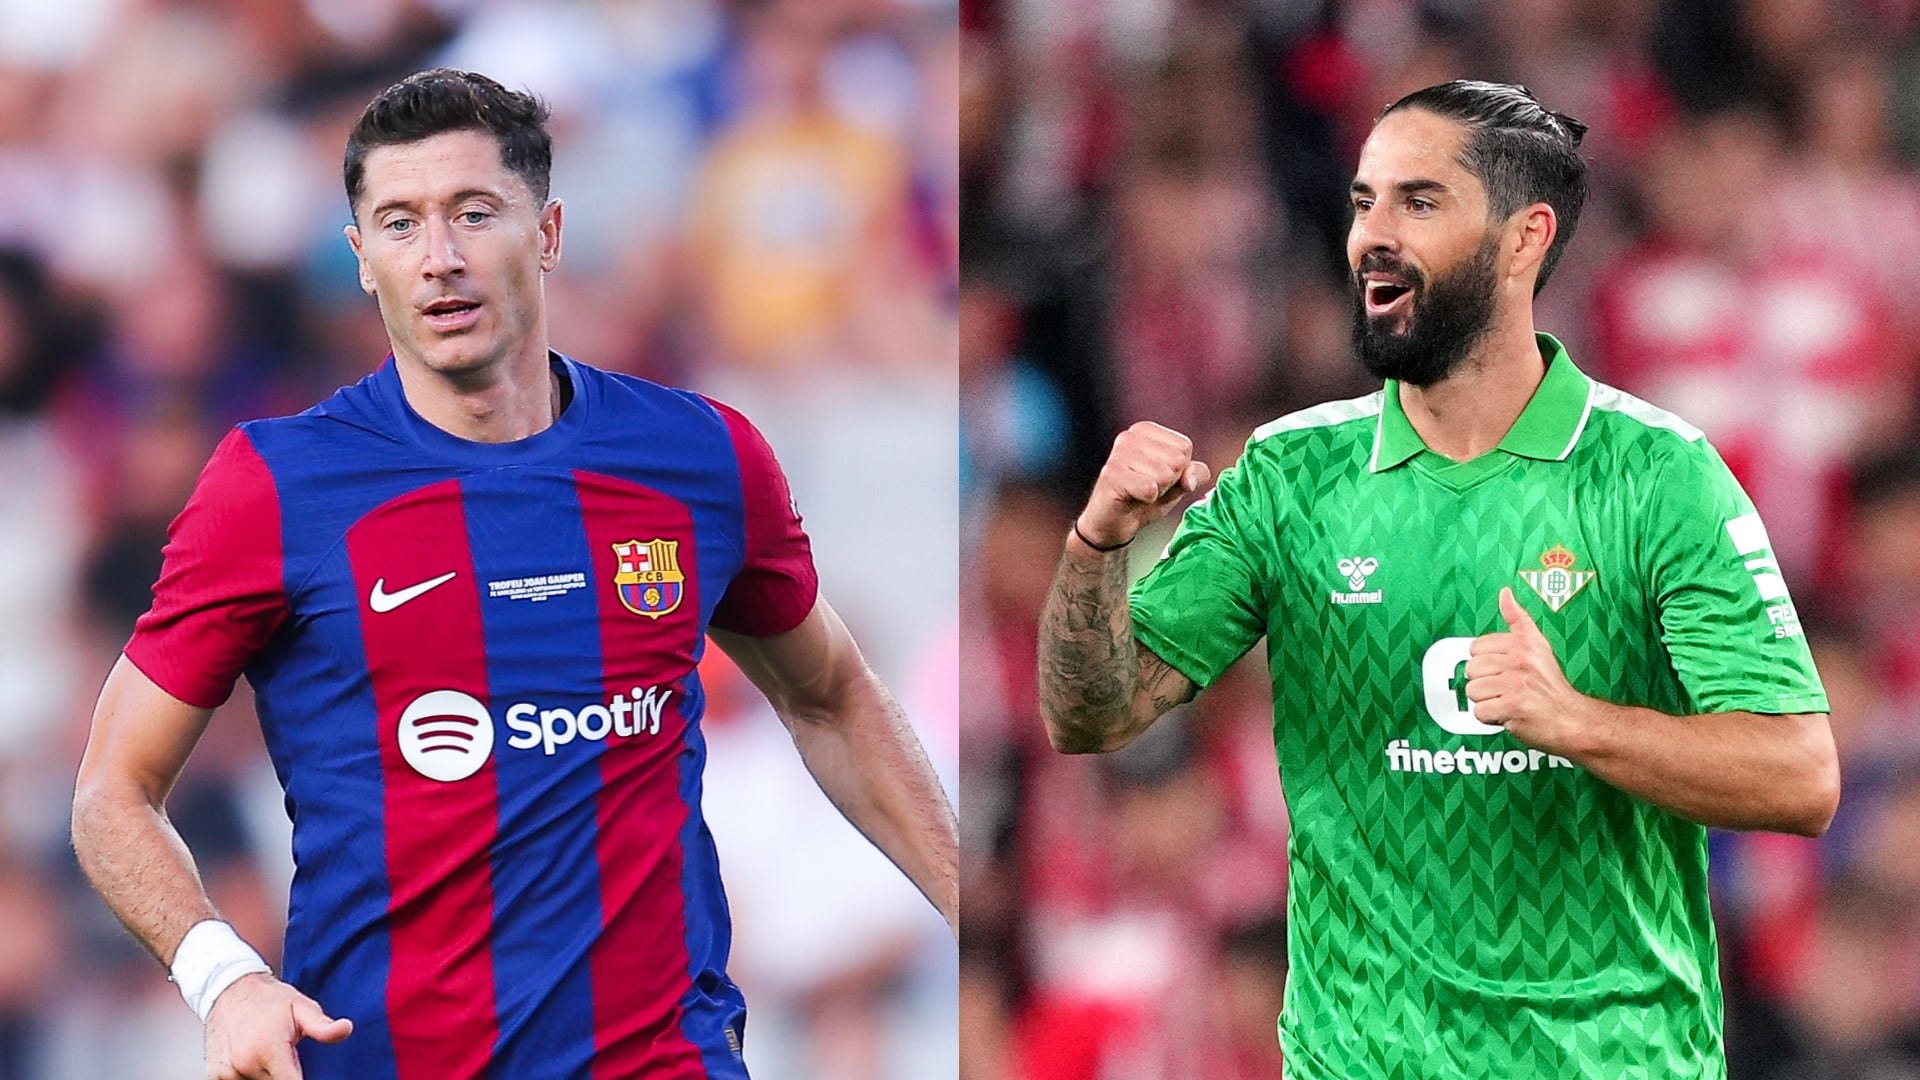 Barcelona vs Real Betis Live stream, TV channel, kick-off time and where to watch Goal Uganda